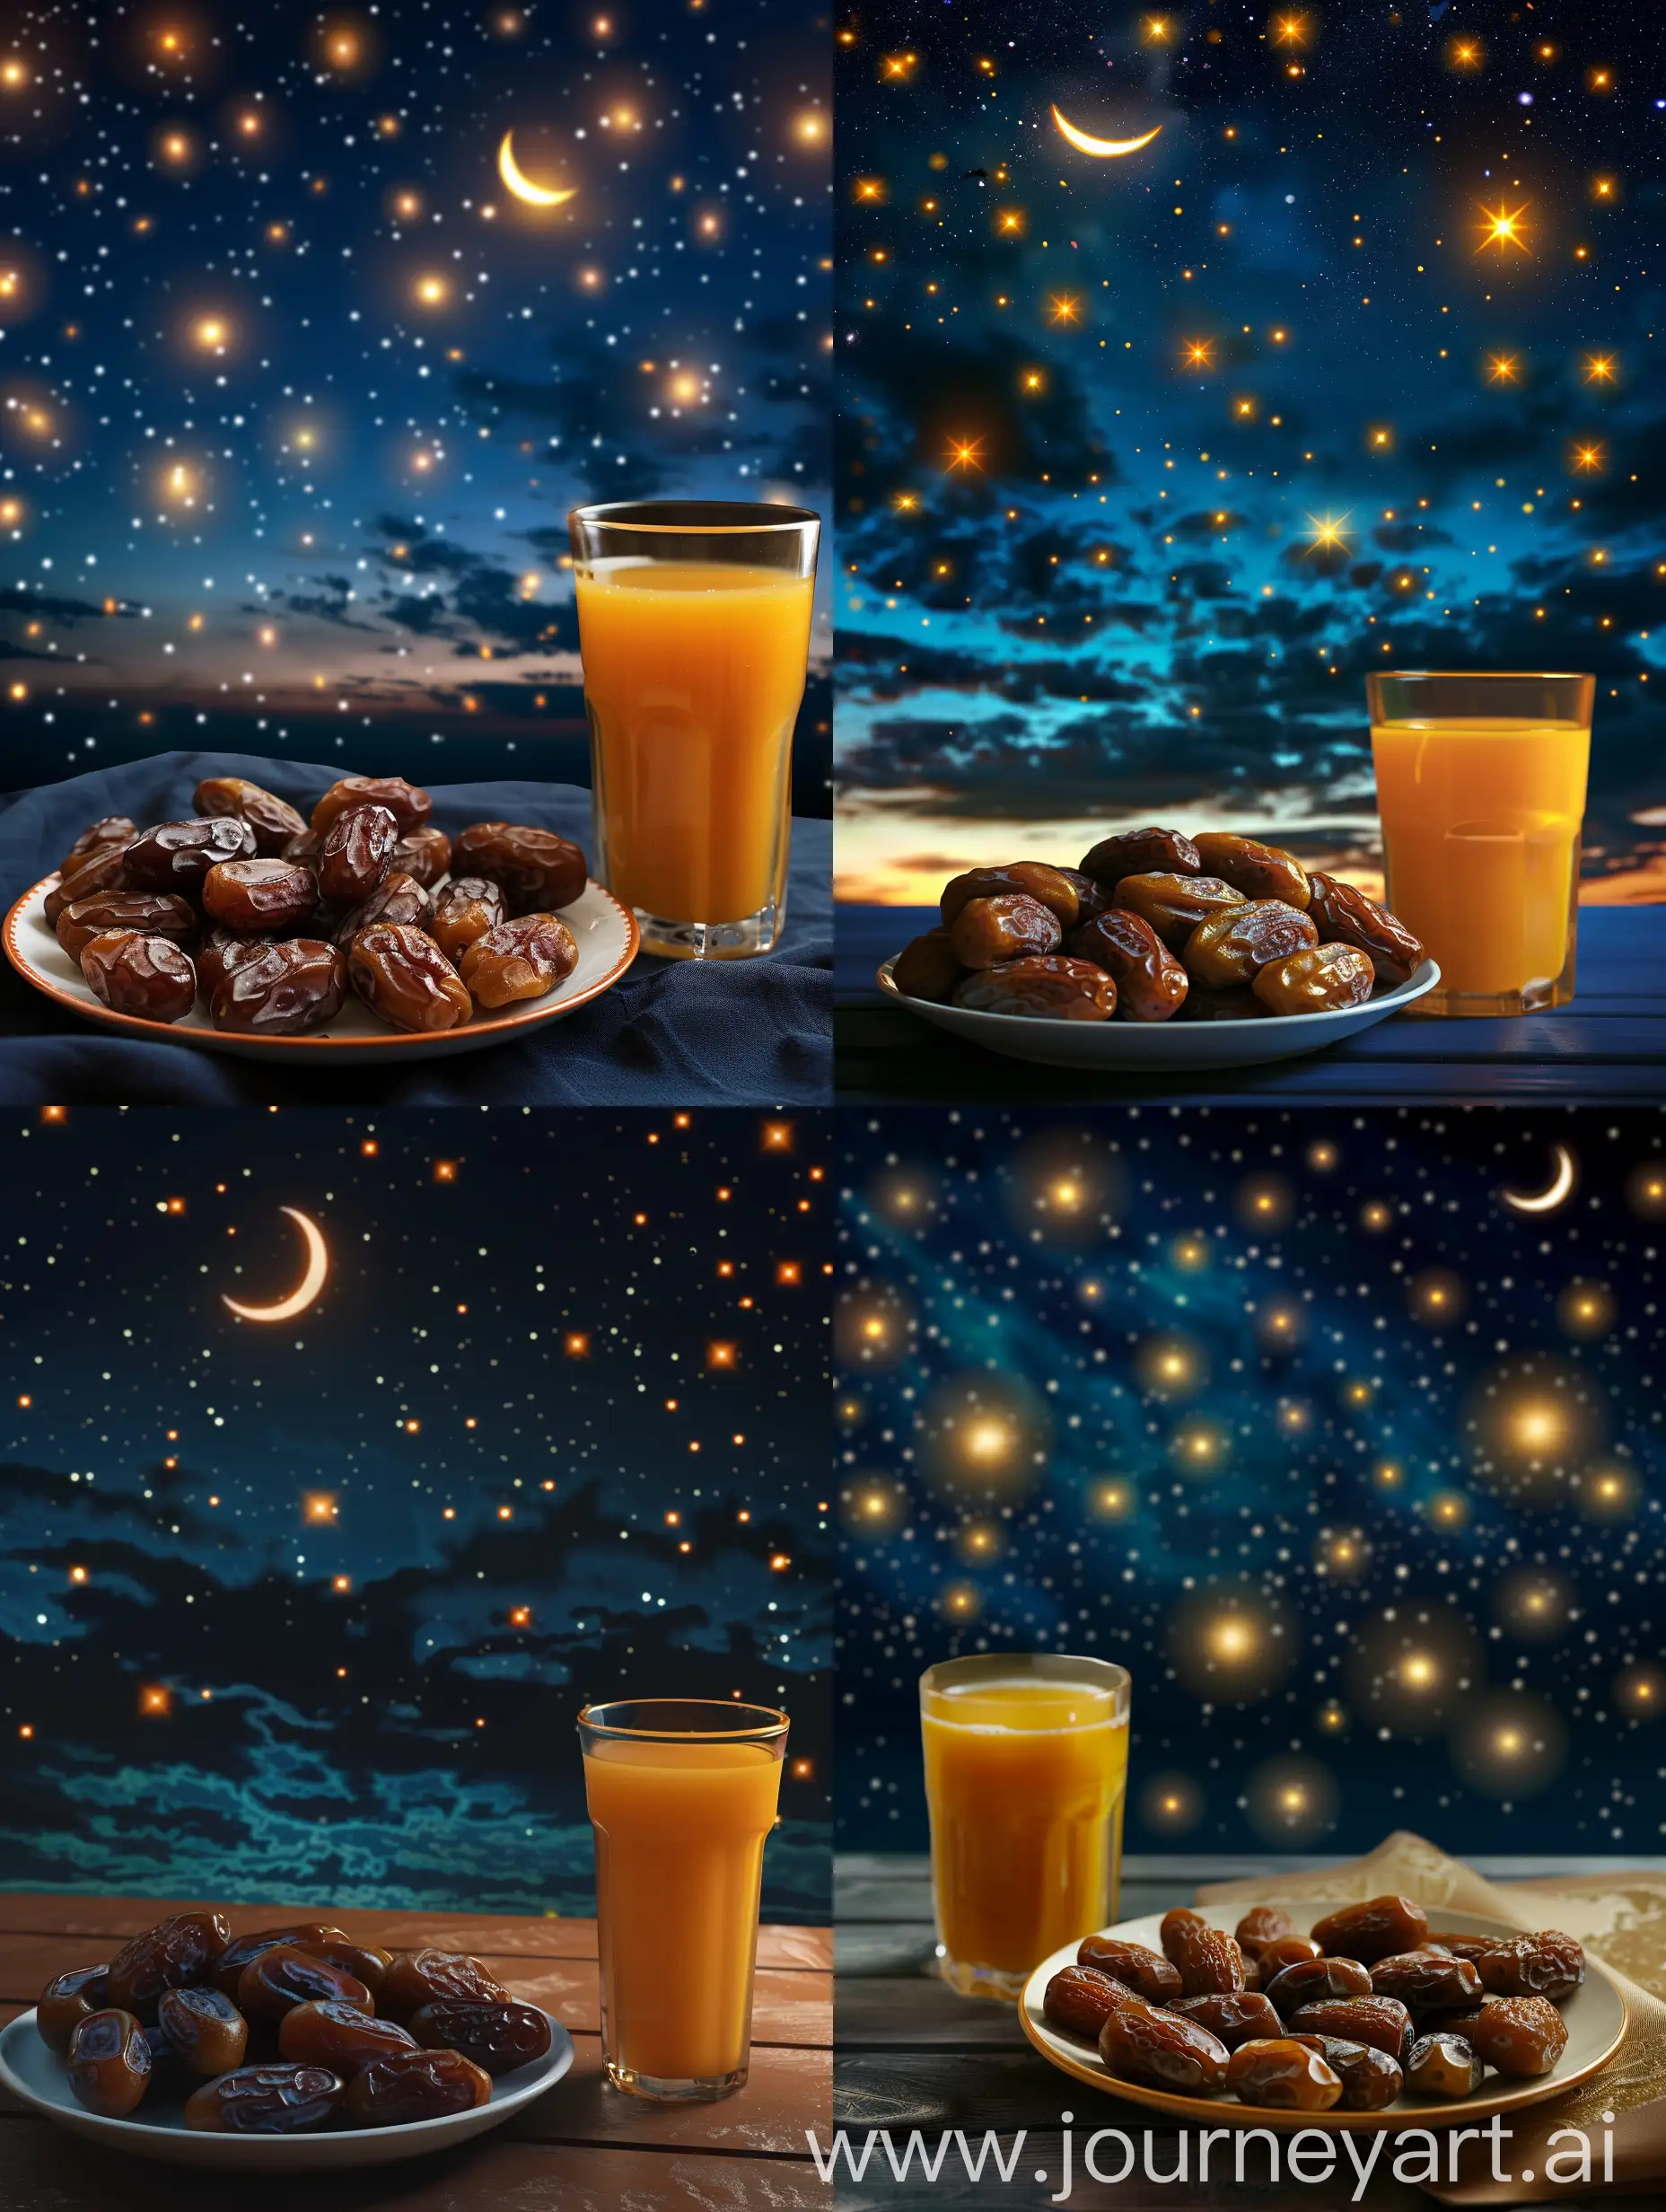 ultra realistic. iftar meal. a plate of dates and a glass of orange juice. night sky background illuminated with glowing stars. there is a crescent moon in the sky. canon eos-id x mark iii dslr --v 6.0
